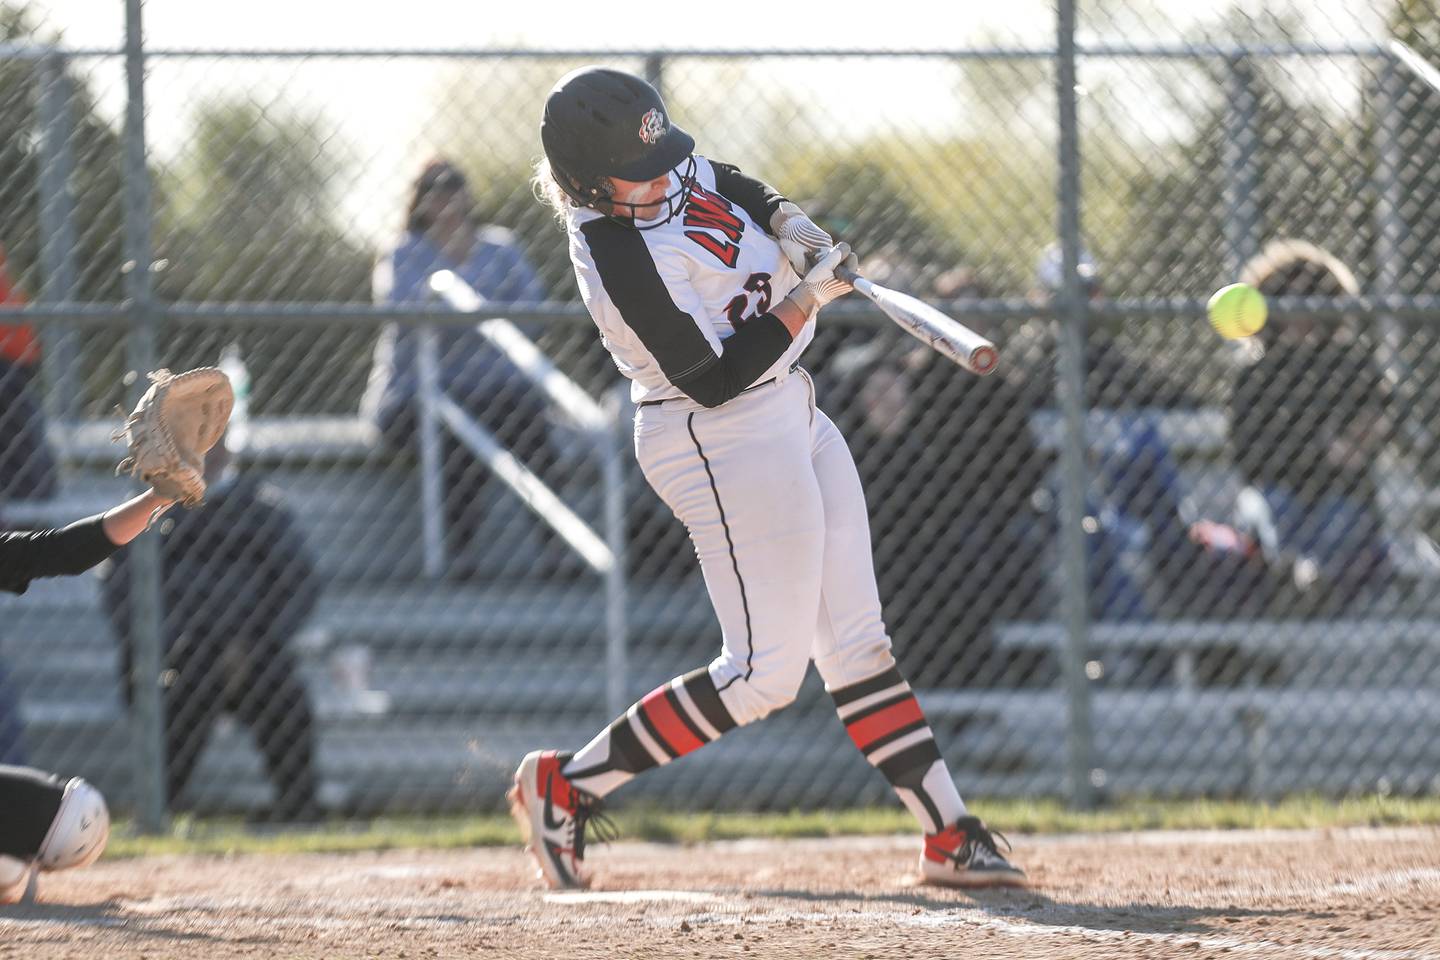 Lincoln-Way Central batter McKenzie Murdock hits a single on Wednesday, May 12, 2021, at Lincoln-Way Central High School in New Lenox, Ill.